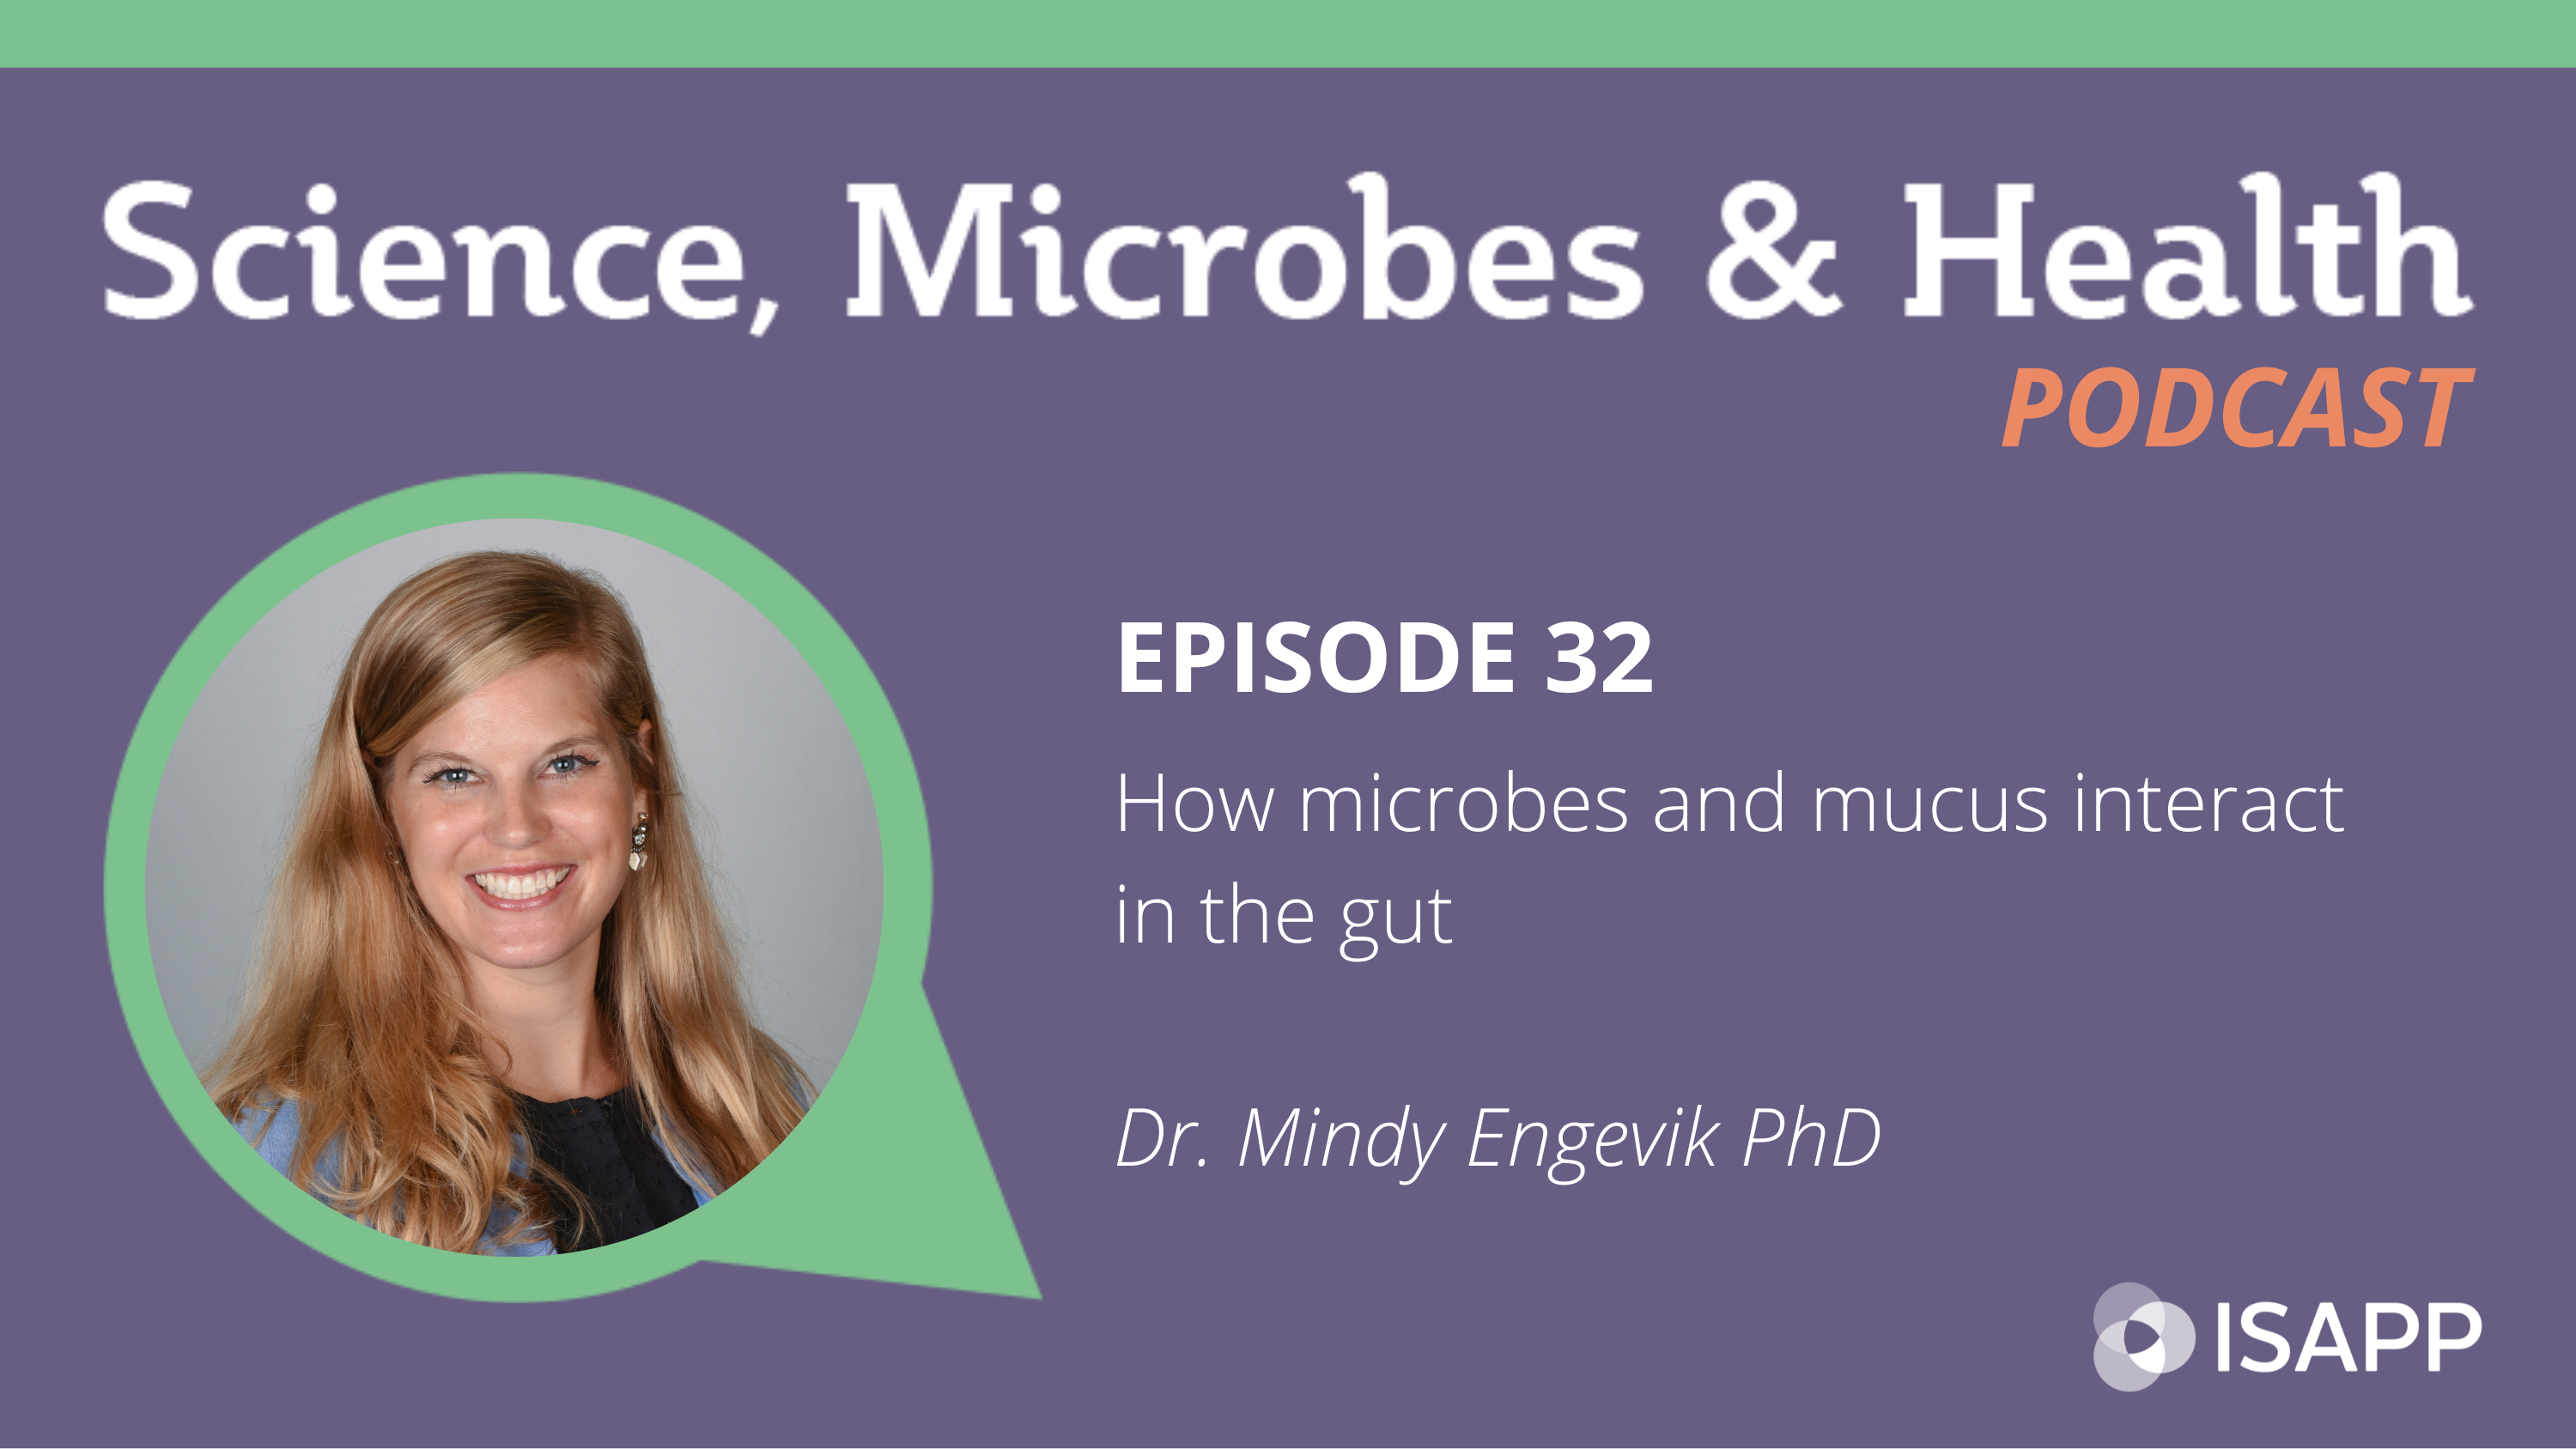 How microbes and mucus interact in the gut, With Dr. Mindy Engevik PhD